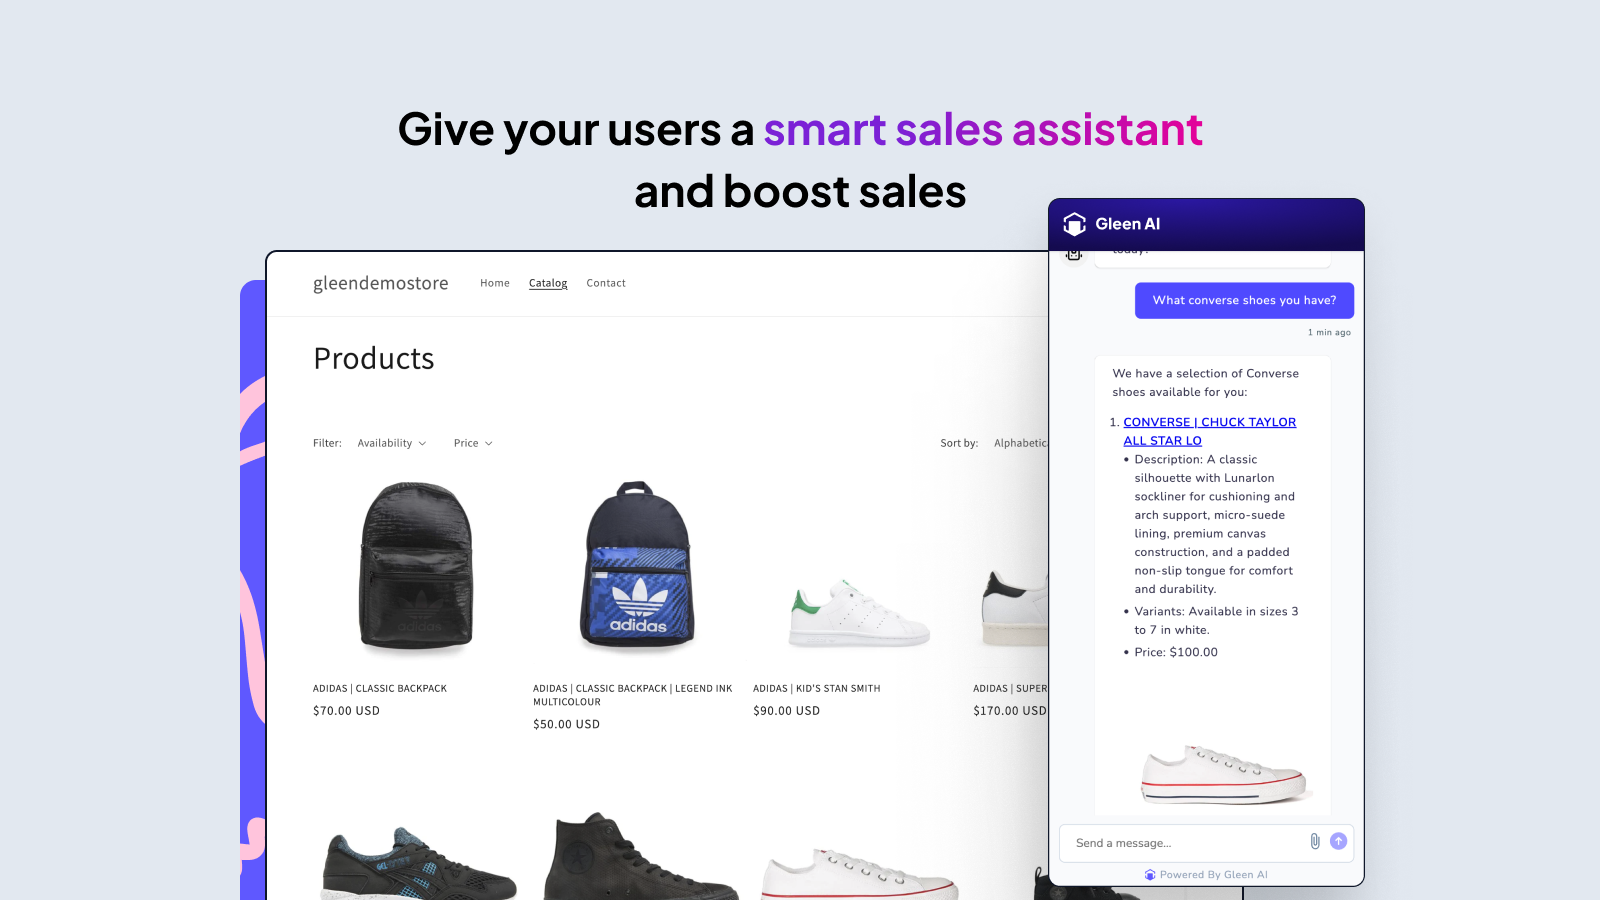 Gleen AI:Give your users a smart sales assistant and boost sales